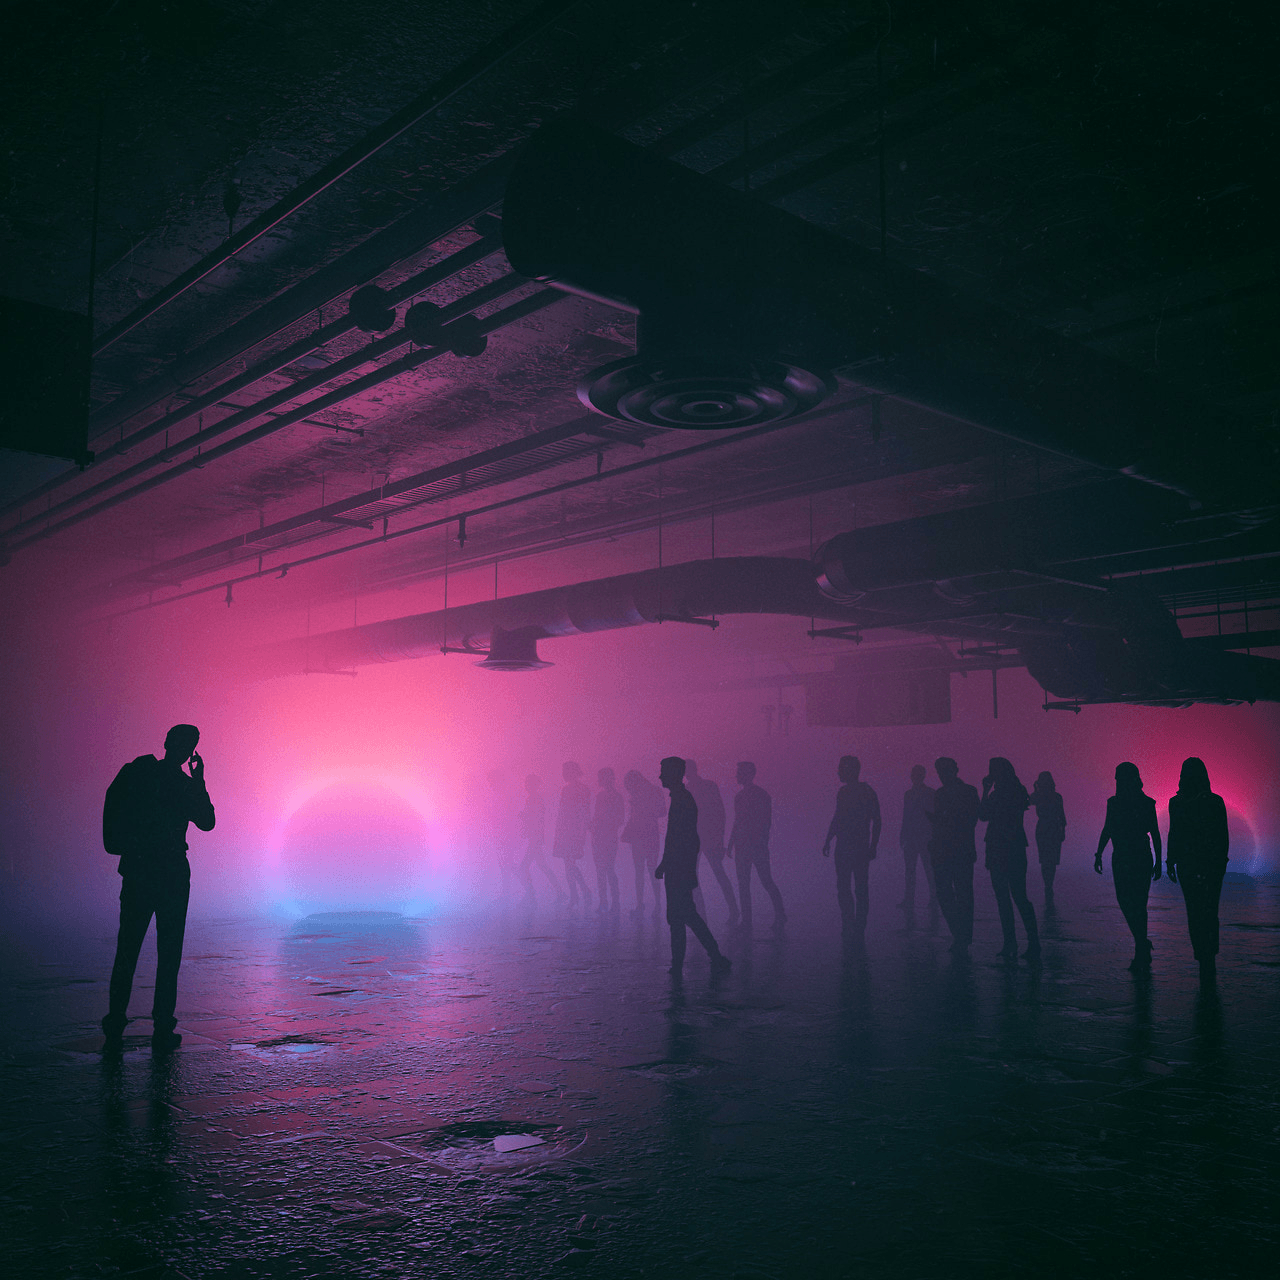 A group of people standing in the dark - Grunge